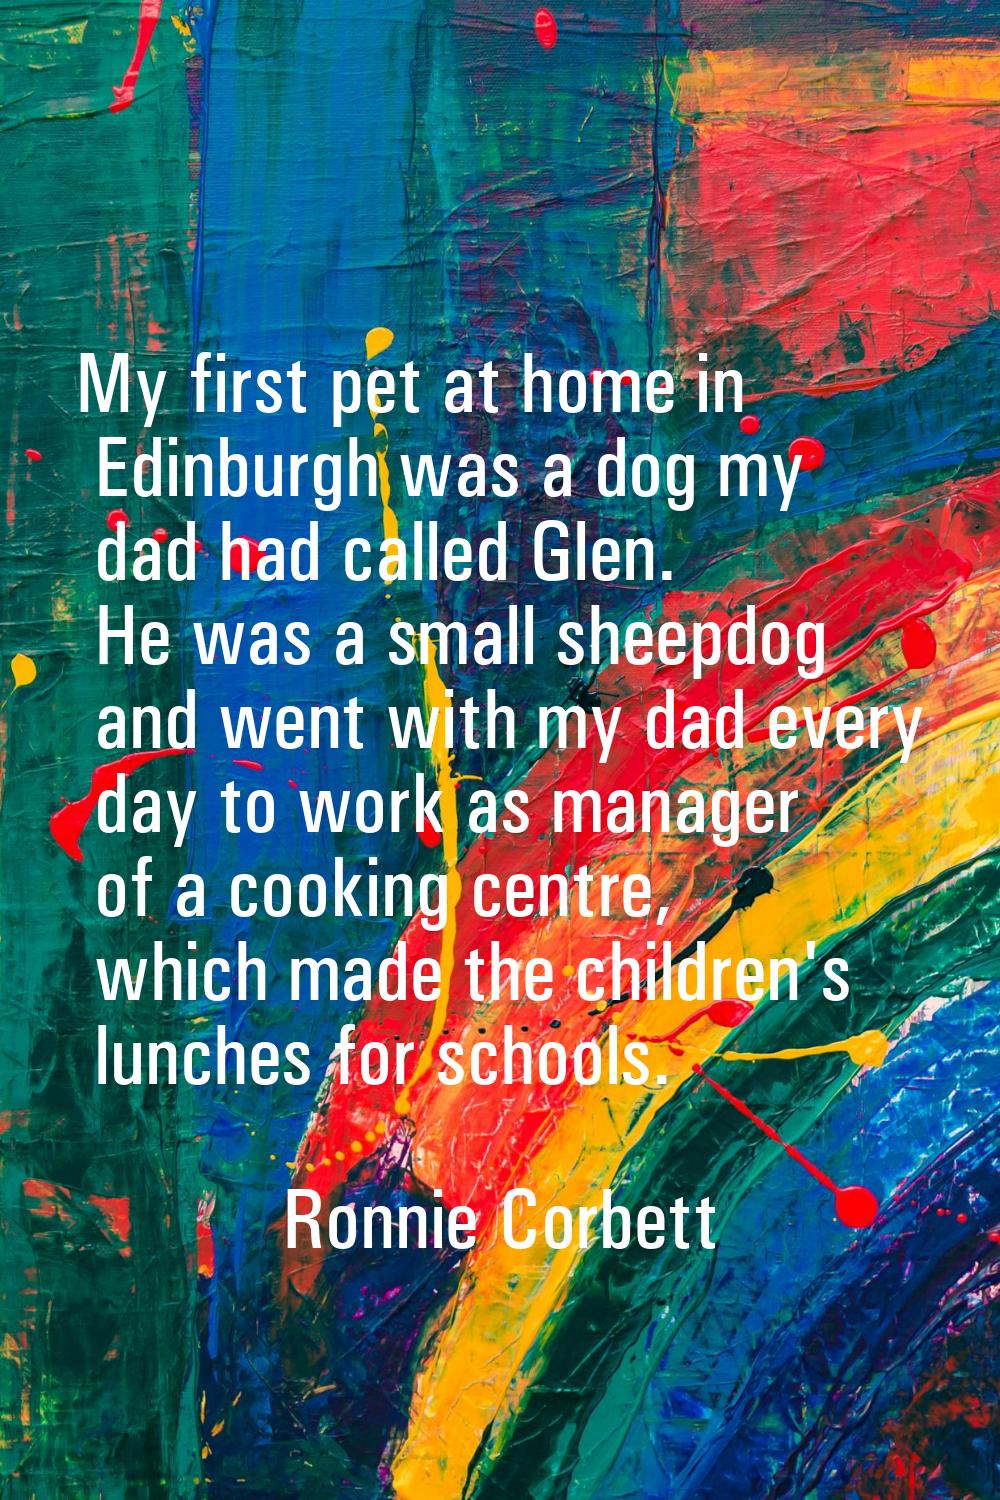 My first pet at home in Edinburgh was a dog my dad had called Glen. He was a small sheepdog and wen